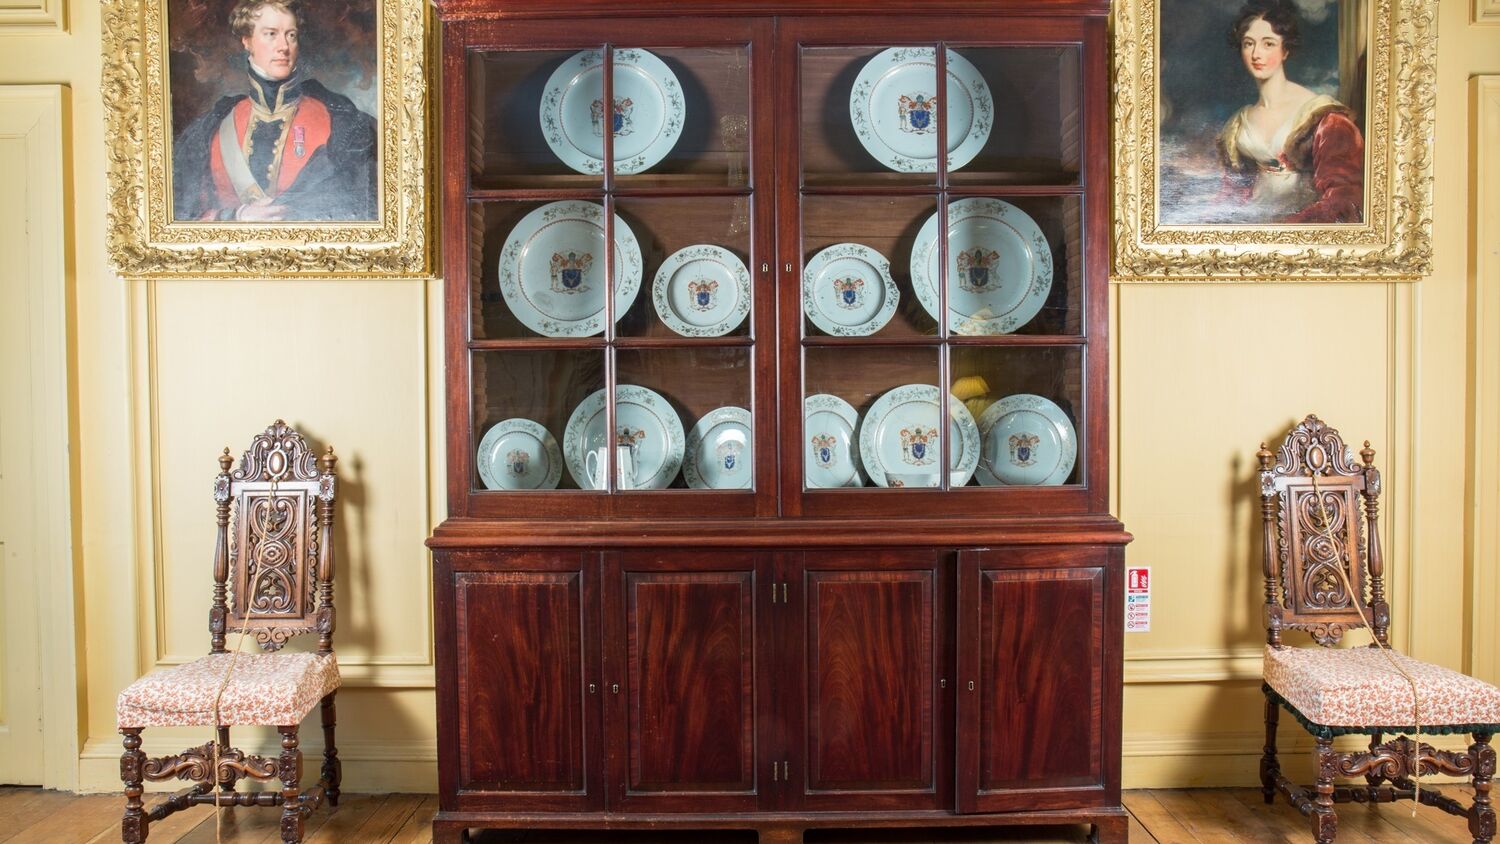 A large wooden bookcase with glass doors at the top. The shelves are filled with china plates instead of books. A chair with a decorative carved back stands either side of the bookcase.